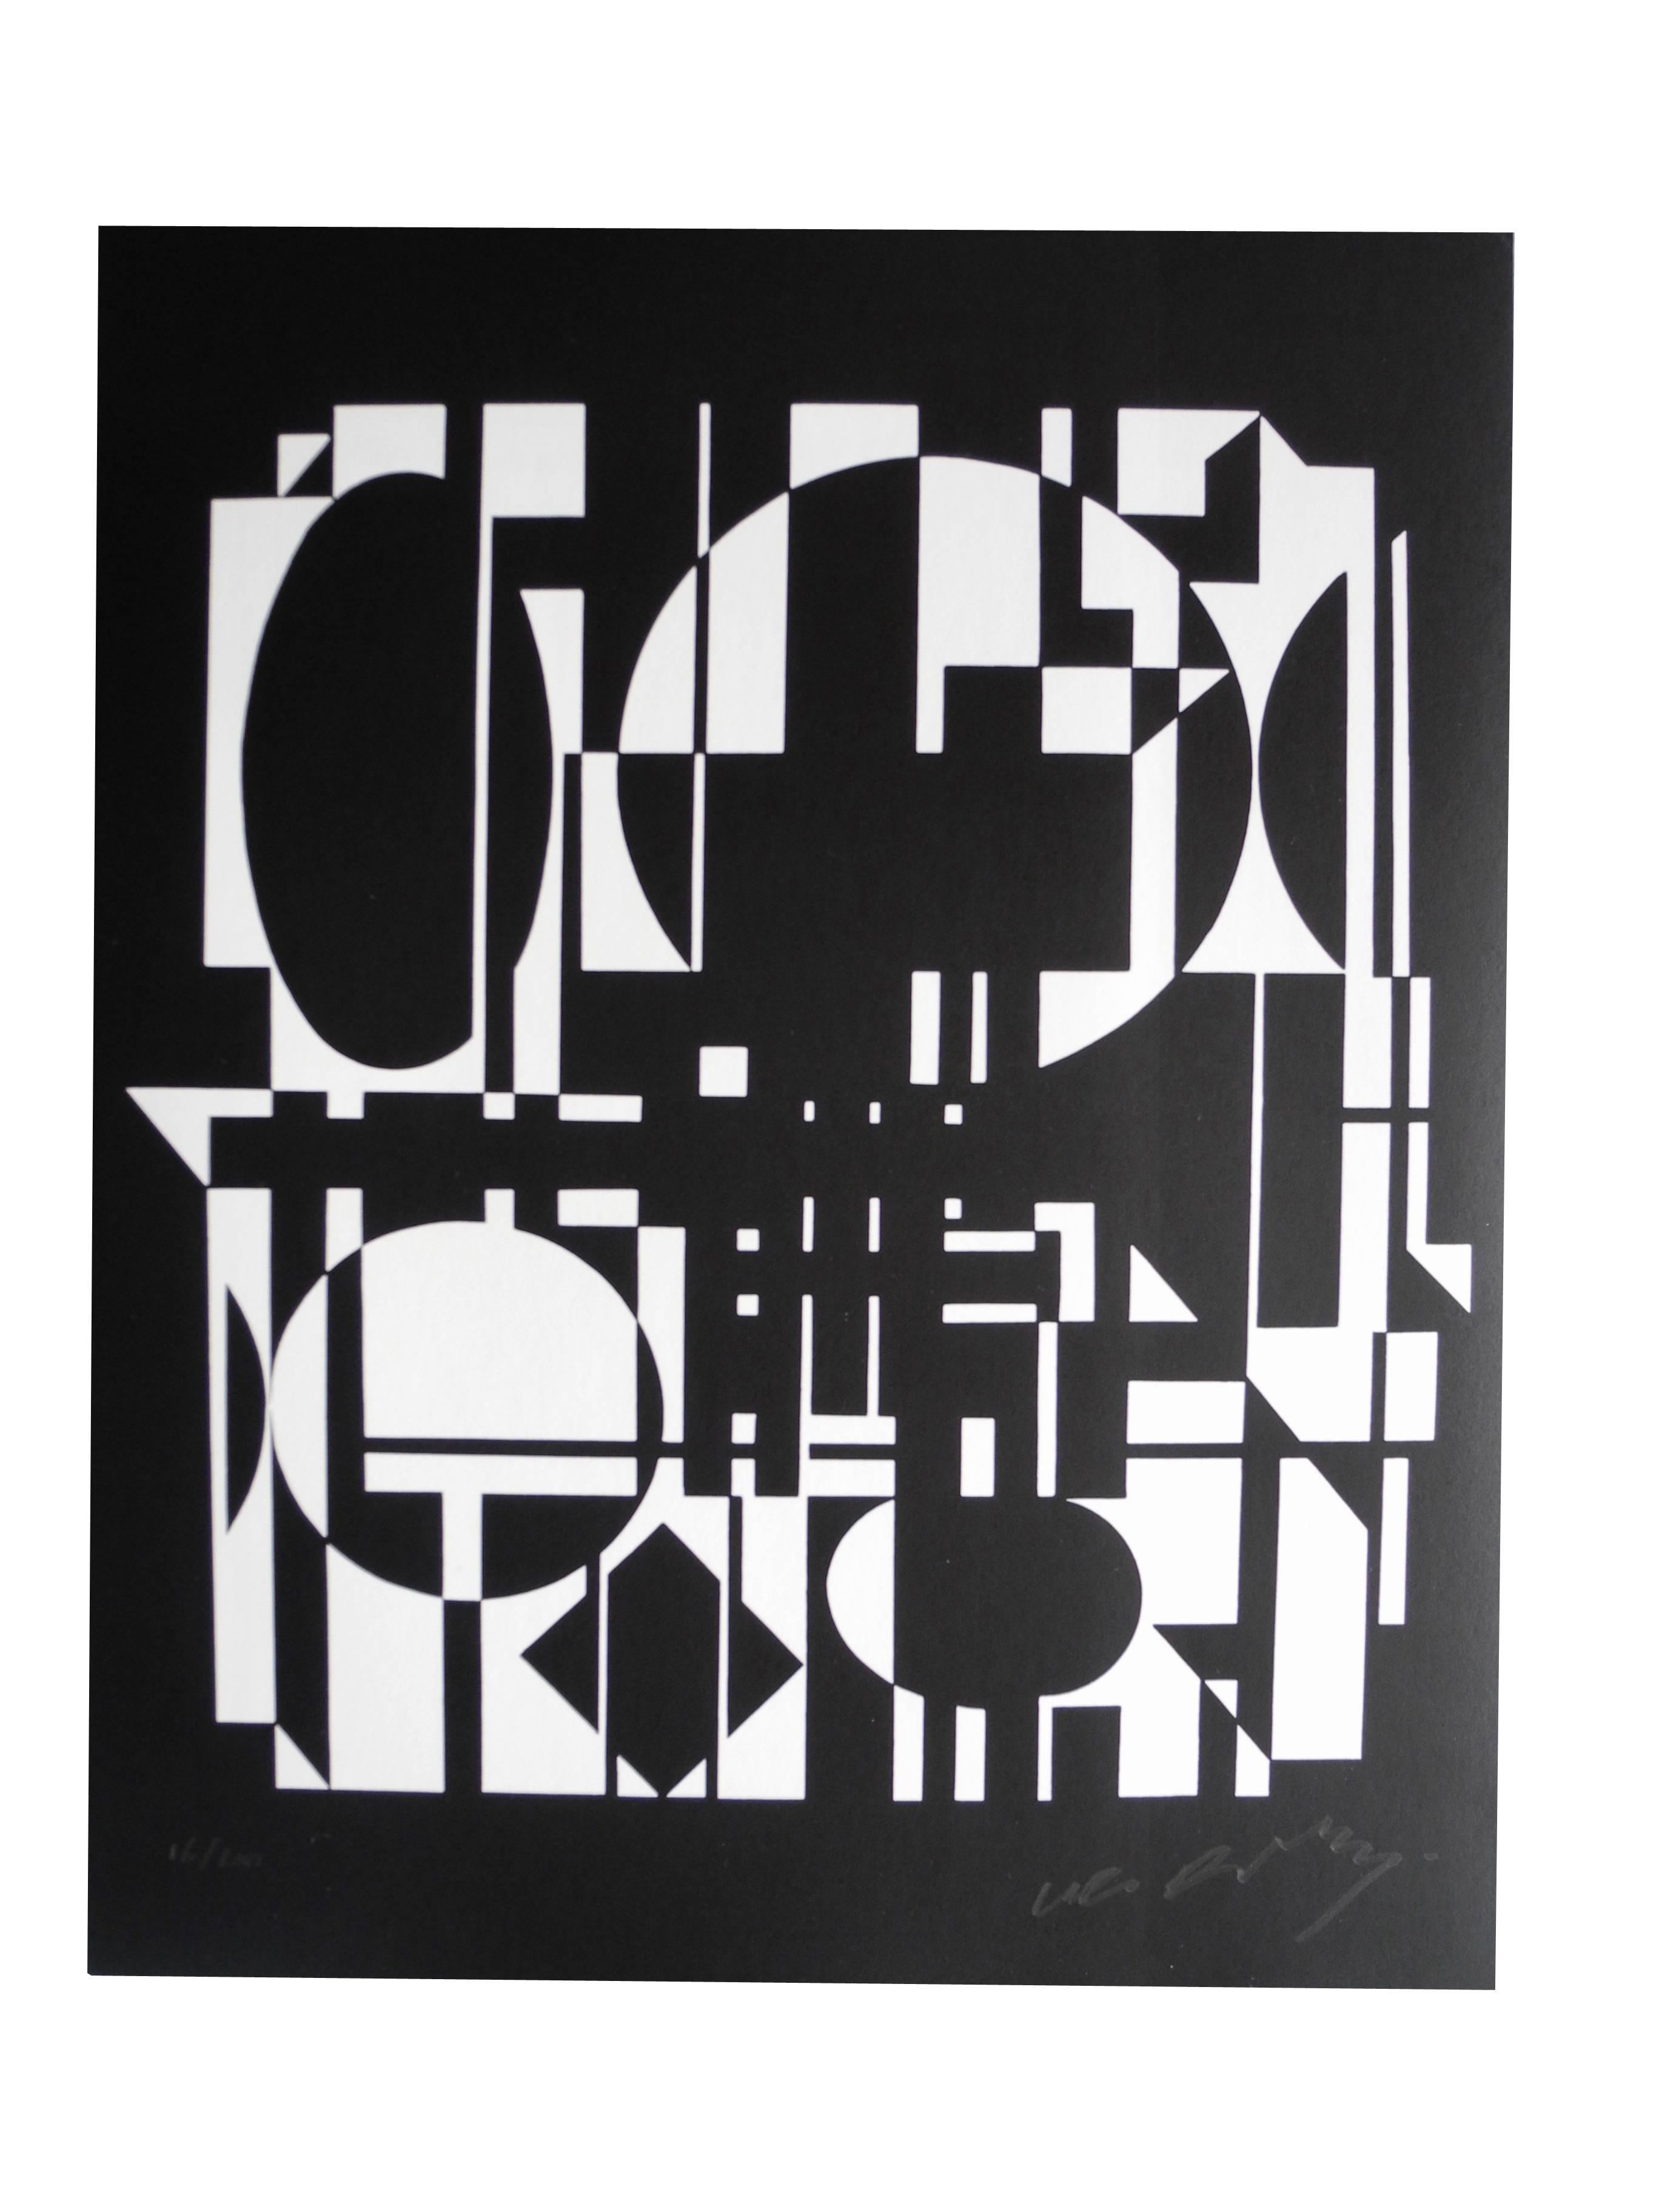 vasarely lithographs sale